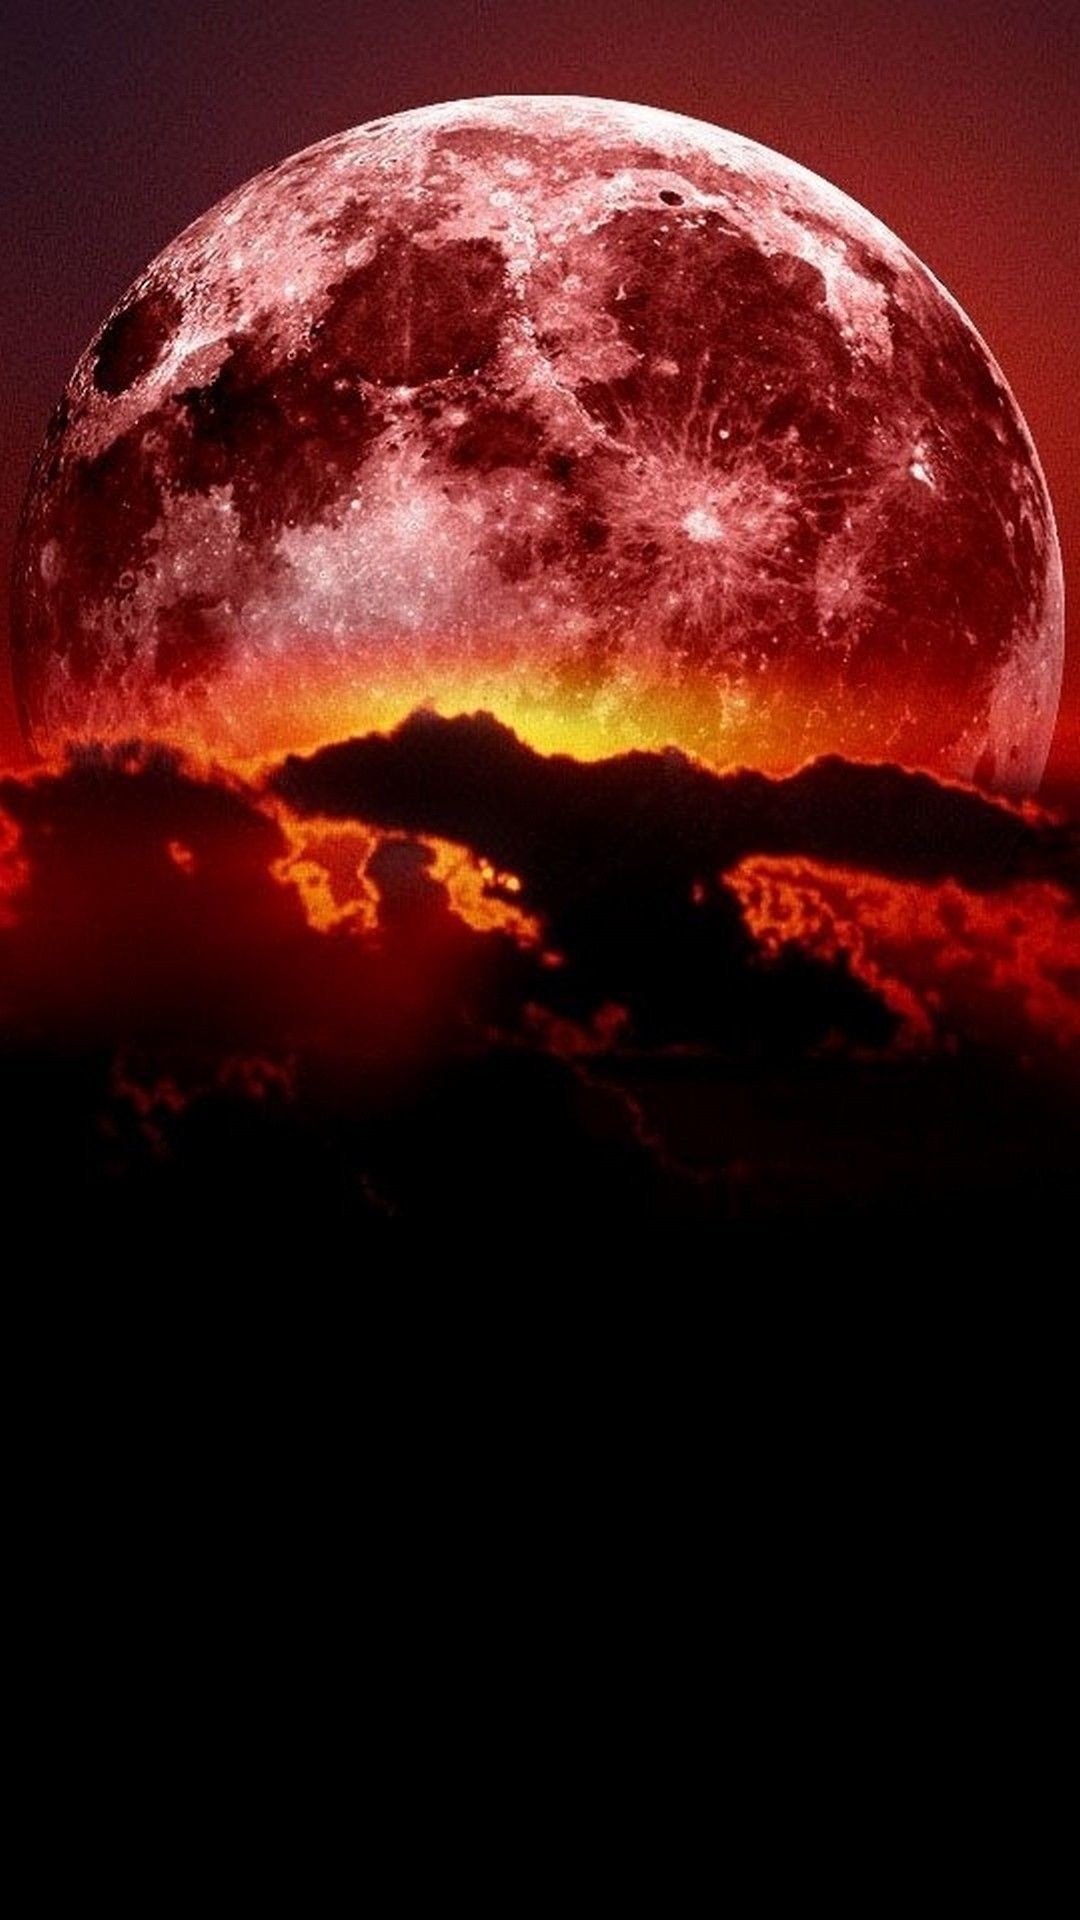 1080x1920 Super Blood Moon Wallpaper Android - Best Android Wallpapers